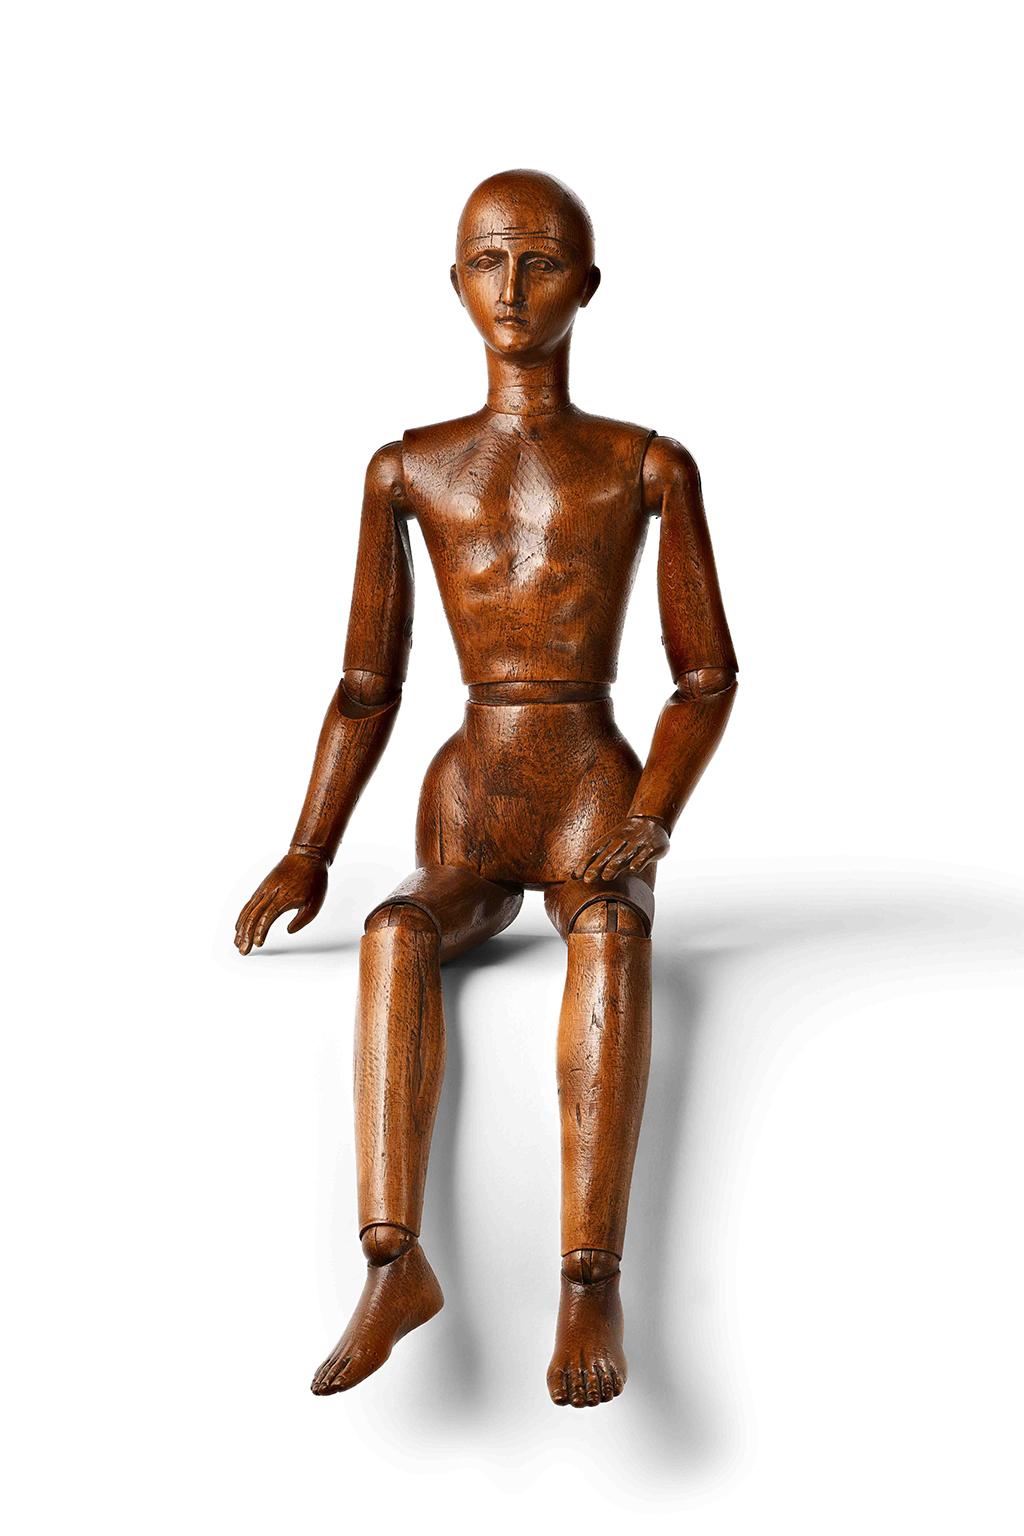 Mannequin
Sculpted and carved wood
Italy or France, second half of the 19th century.
It measures 25.59 x 6.29 x 3.54 in (65.5 x 16 x 9 cm)
It weighs 2.2 lb circa (1 kg circa)
State of conservation: Good, slight touch-ups and signs of